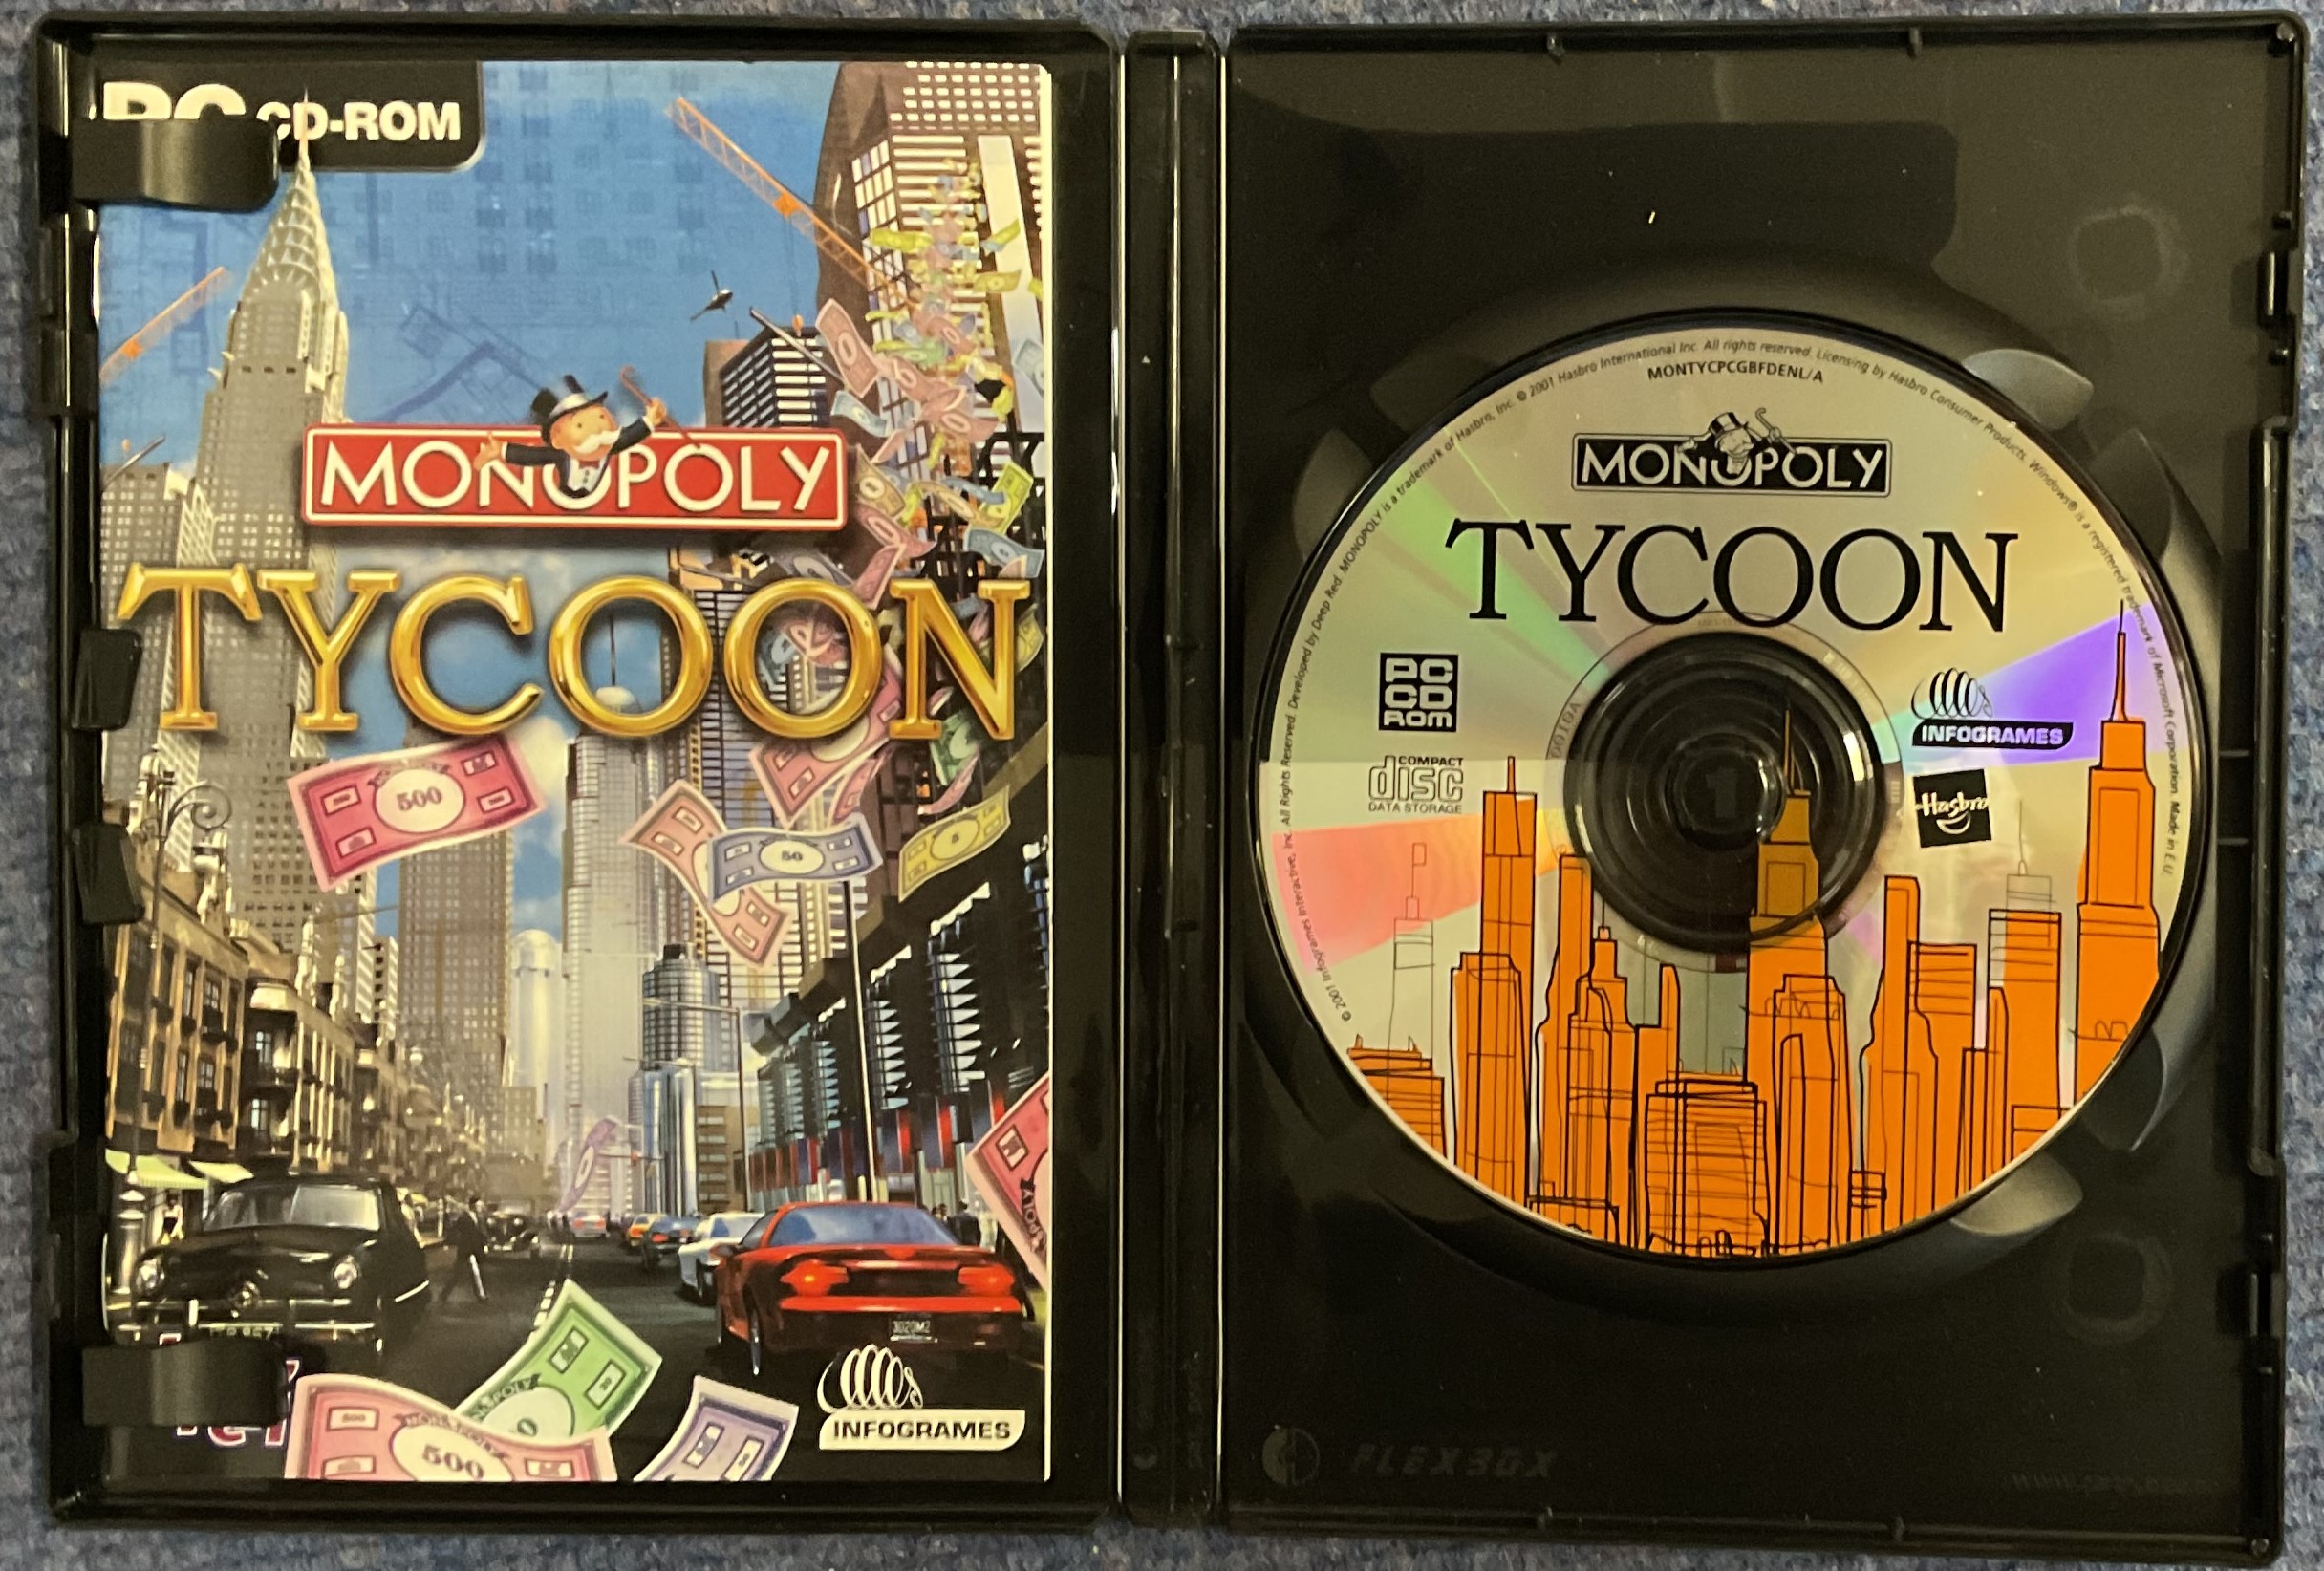 Monopoly Tycoon PC Game by Infogrames 2001 Boxed and complete with instructions in good